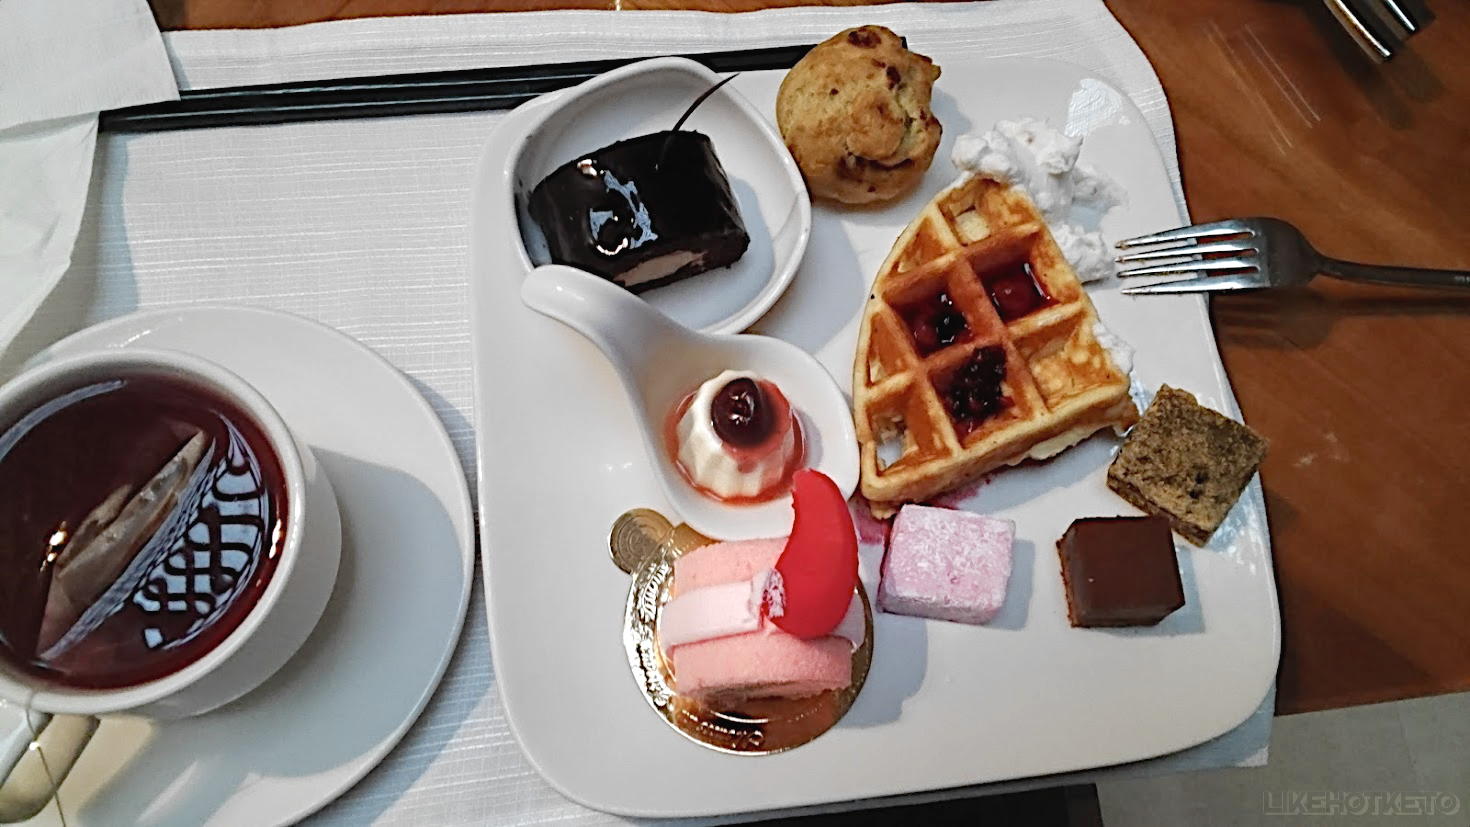 Plate with an assortment of fancy sweets, with a small panna cotta in the center, next to a cup of tea.